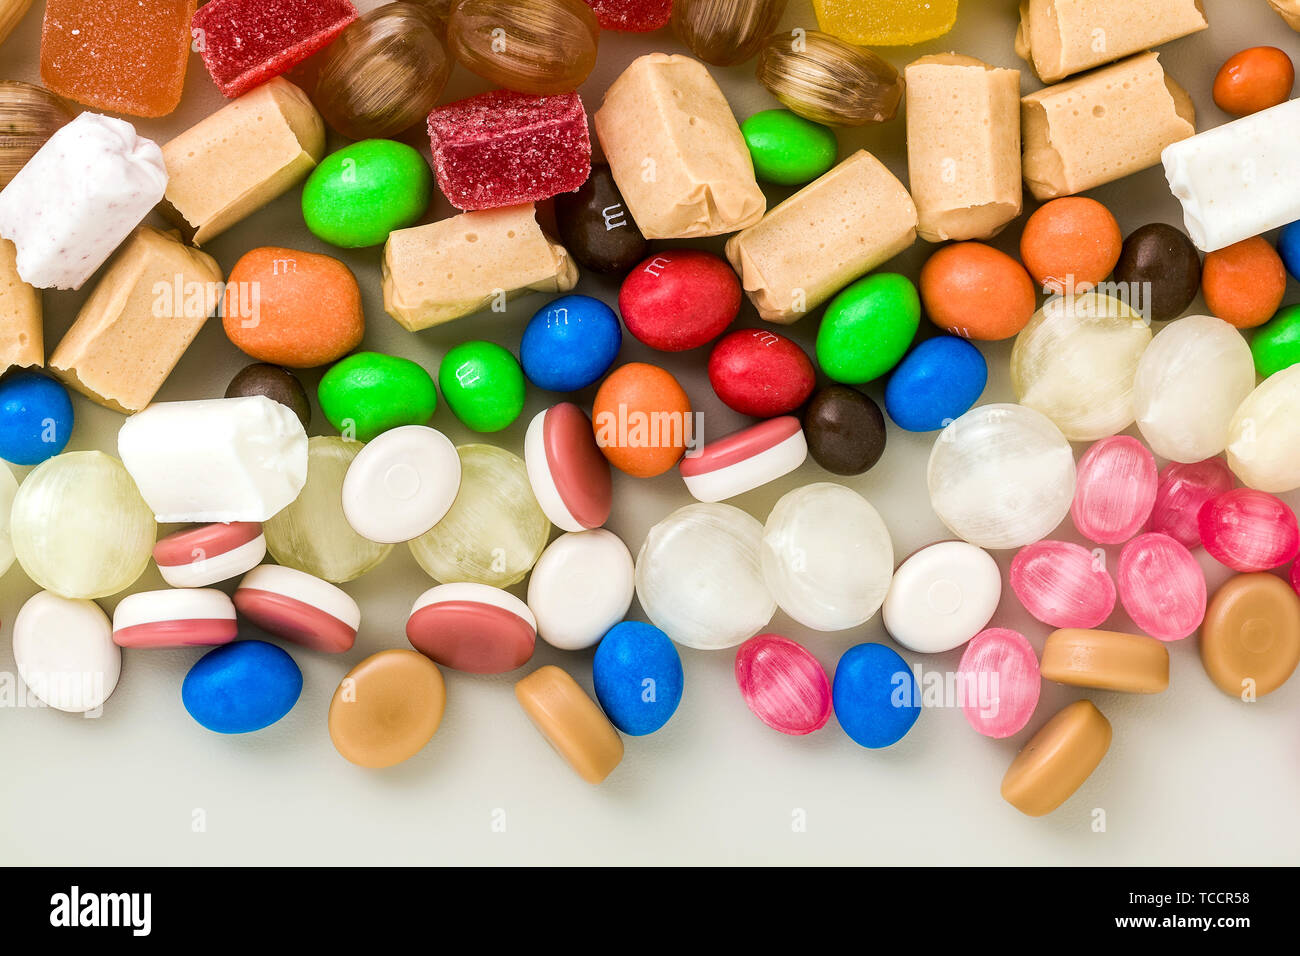 multicolored caramel candies scattered on the table background. sugar products. colored sweets Stock Photo